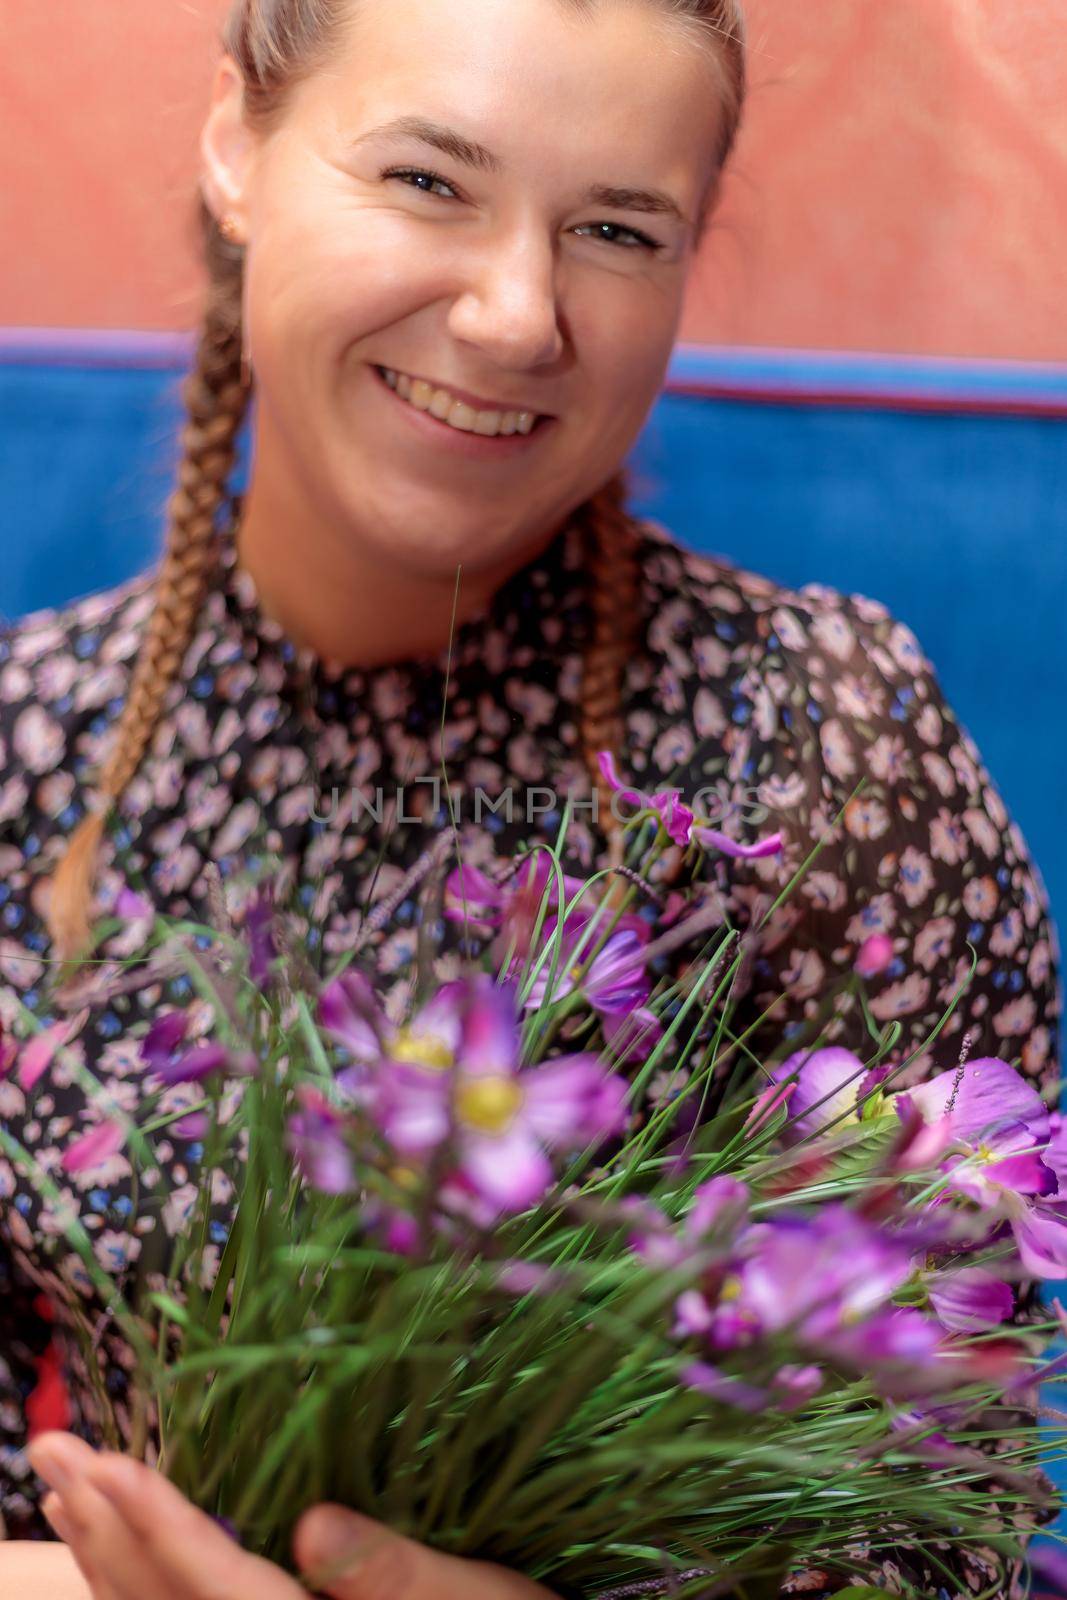 Portrait of a young beautiful girl with a purple bouquet. The girl with pigtails is holding a bouquet of flowers.